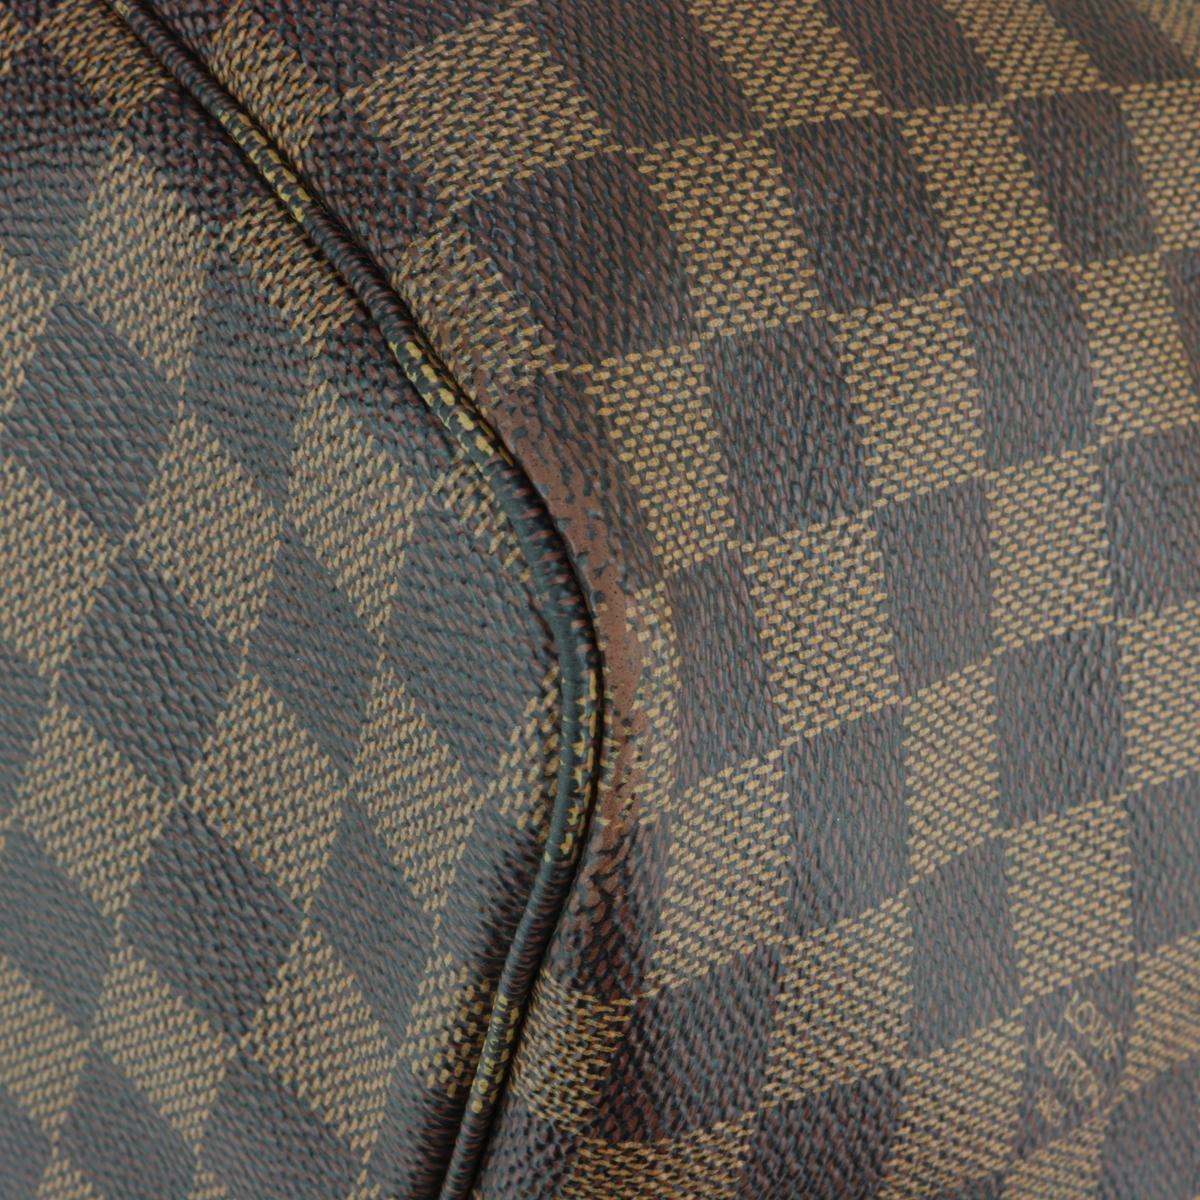 Louis Vuitton Neverfull GM Bag in Damier Ebène with Cherry Red Interior 2015 4